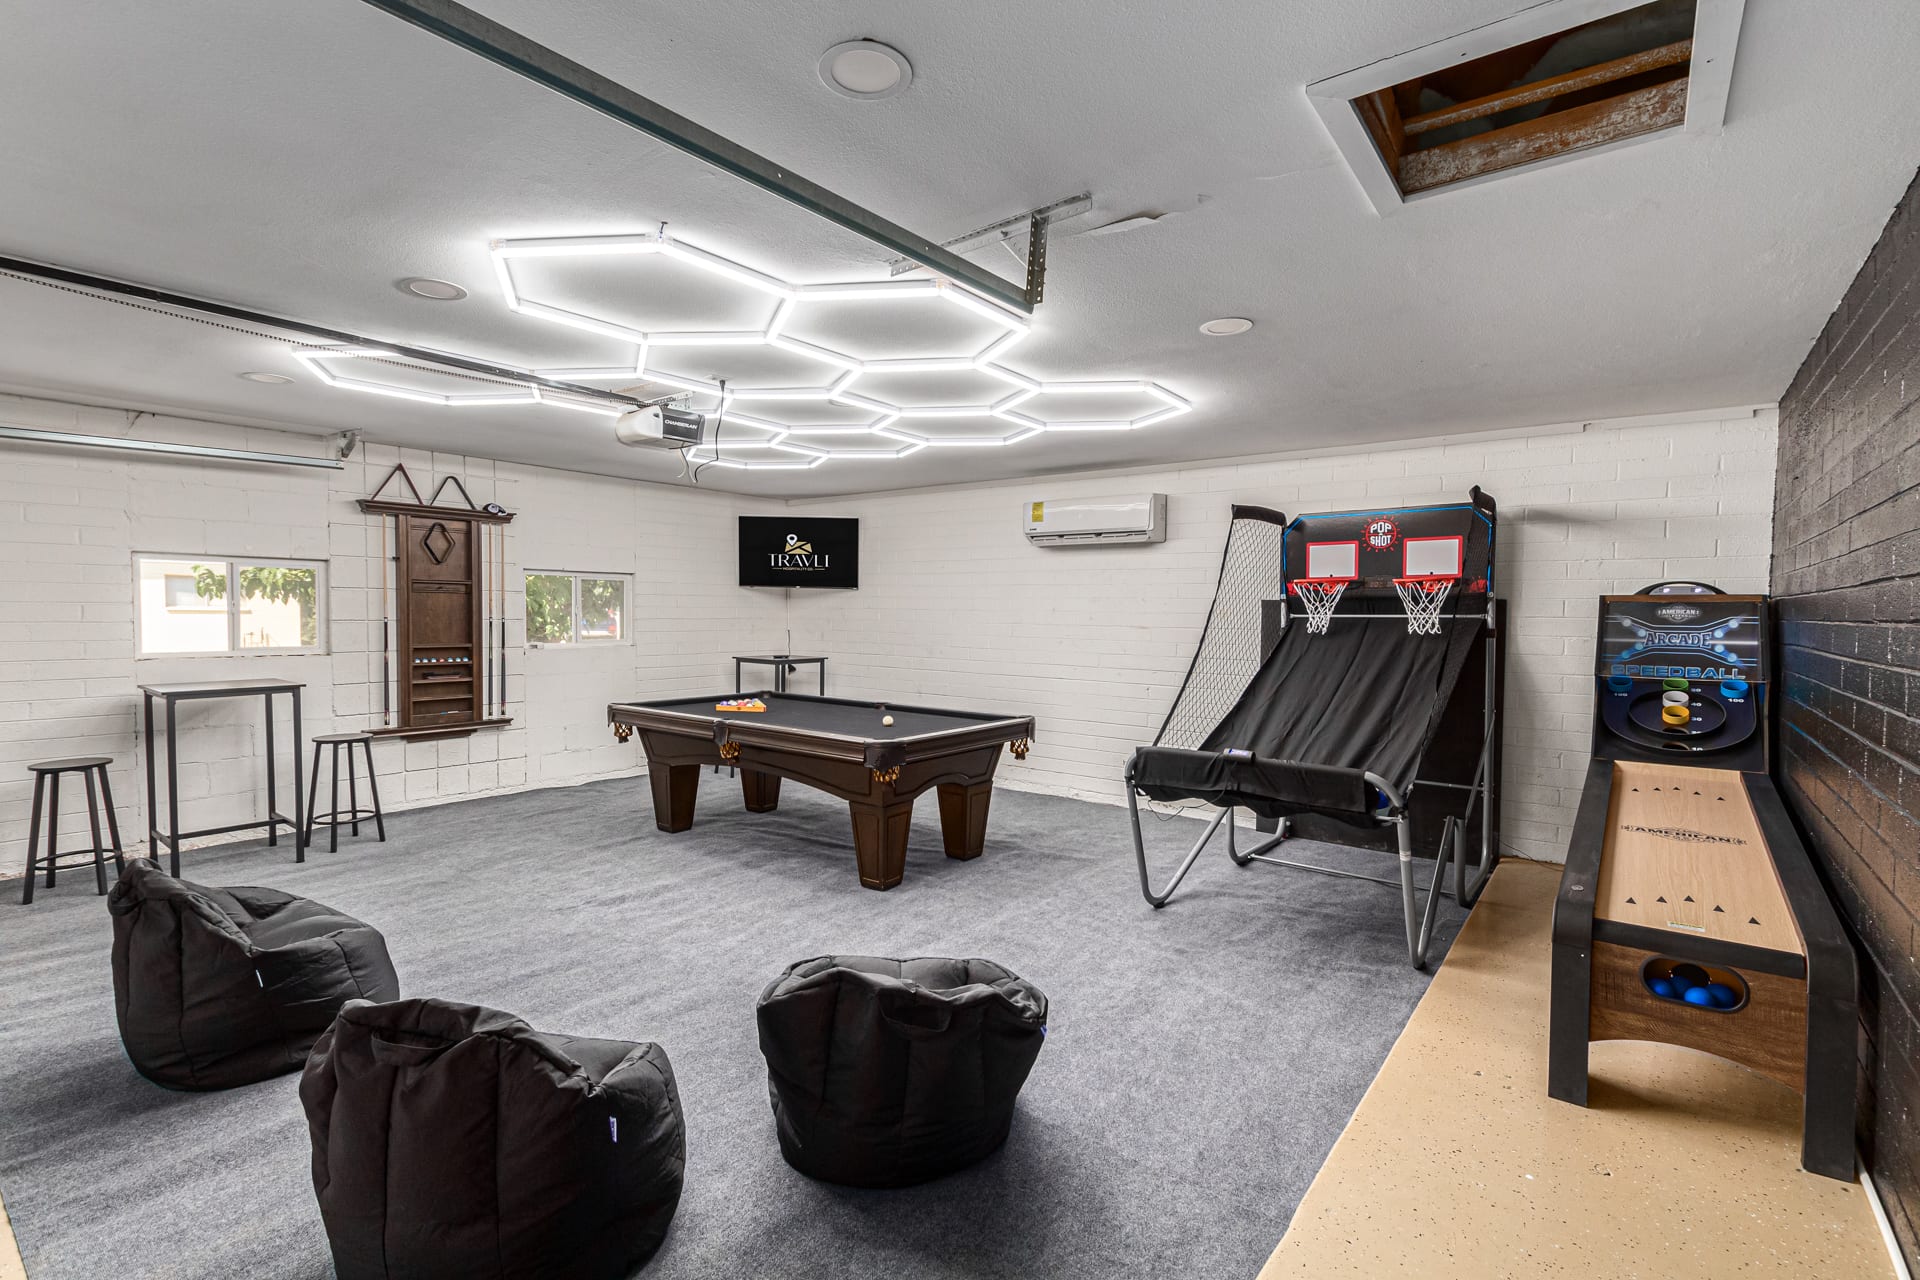 Brand New Garage Gameroom with Pool/Ping Pong, Pop-a-Shot and Skeeball